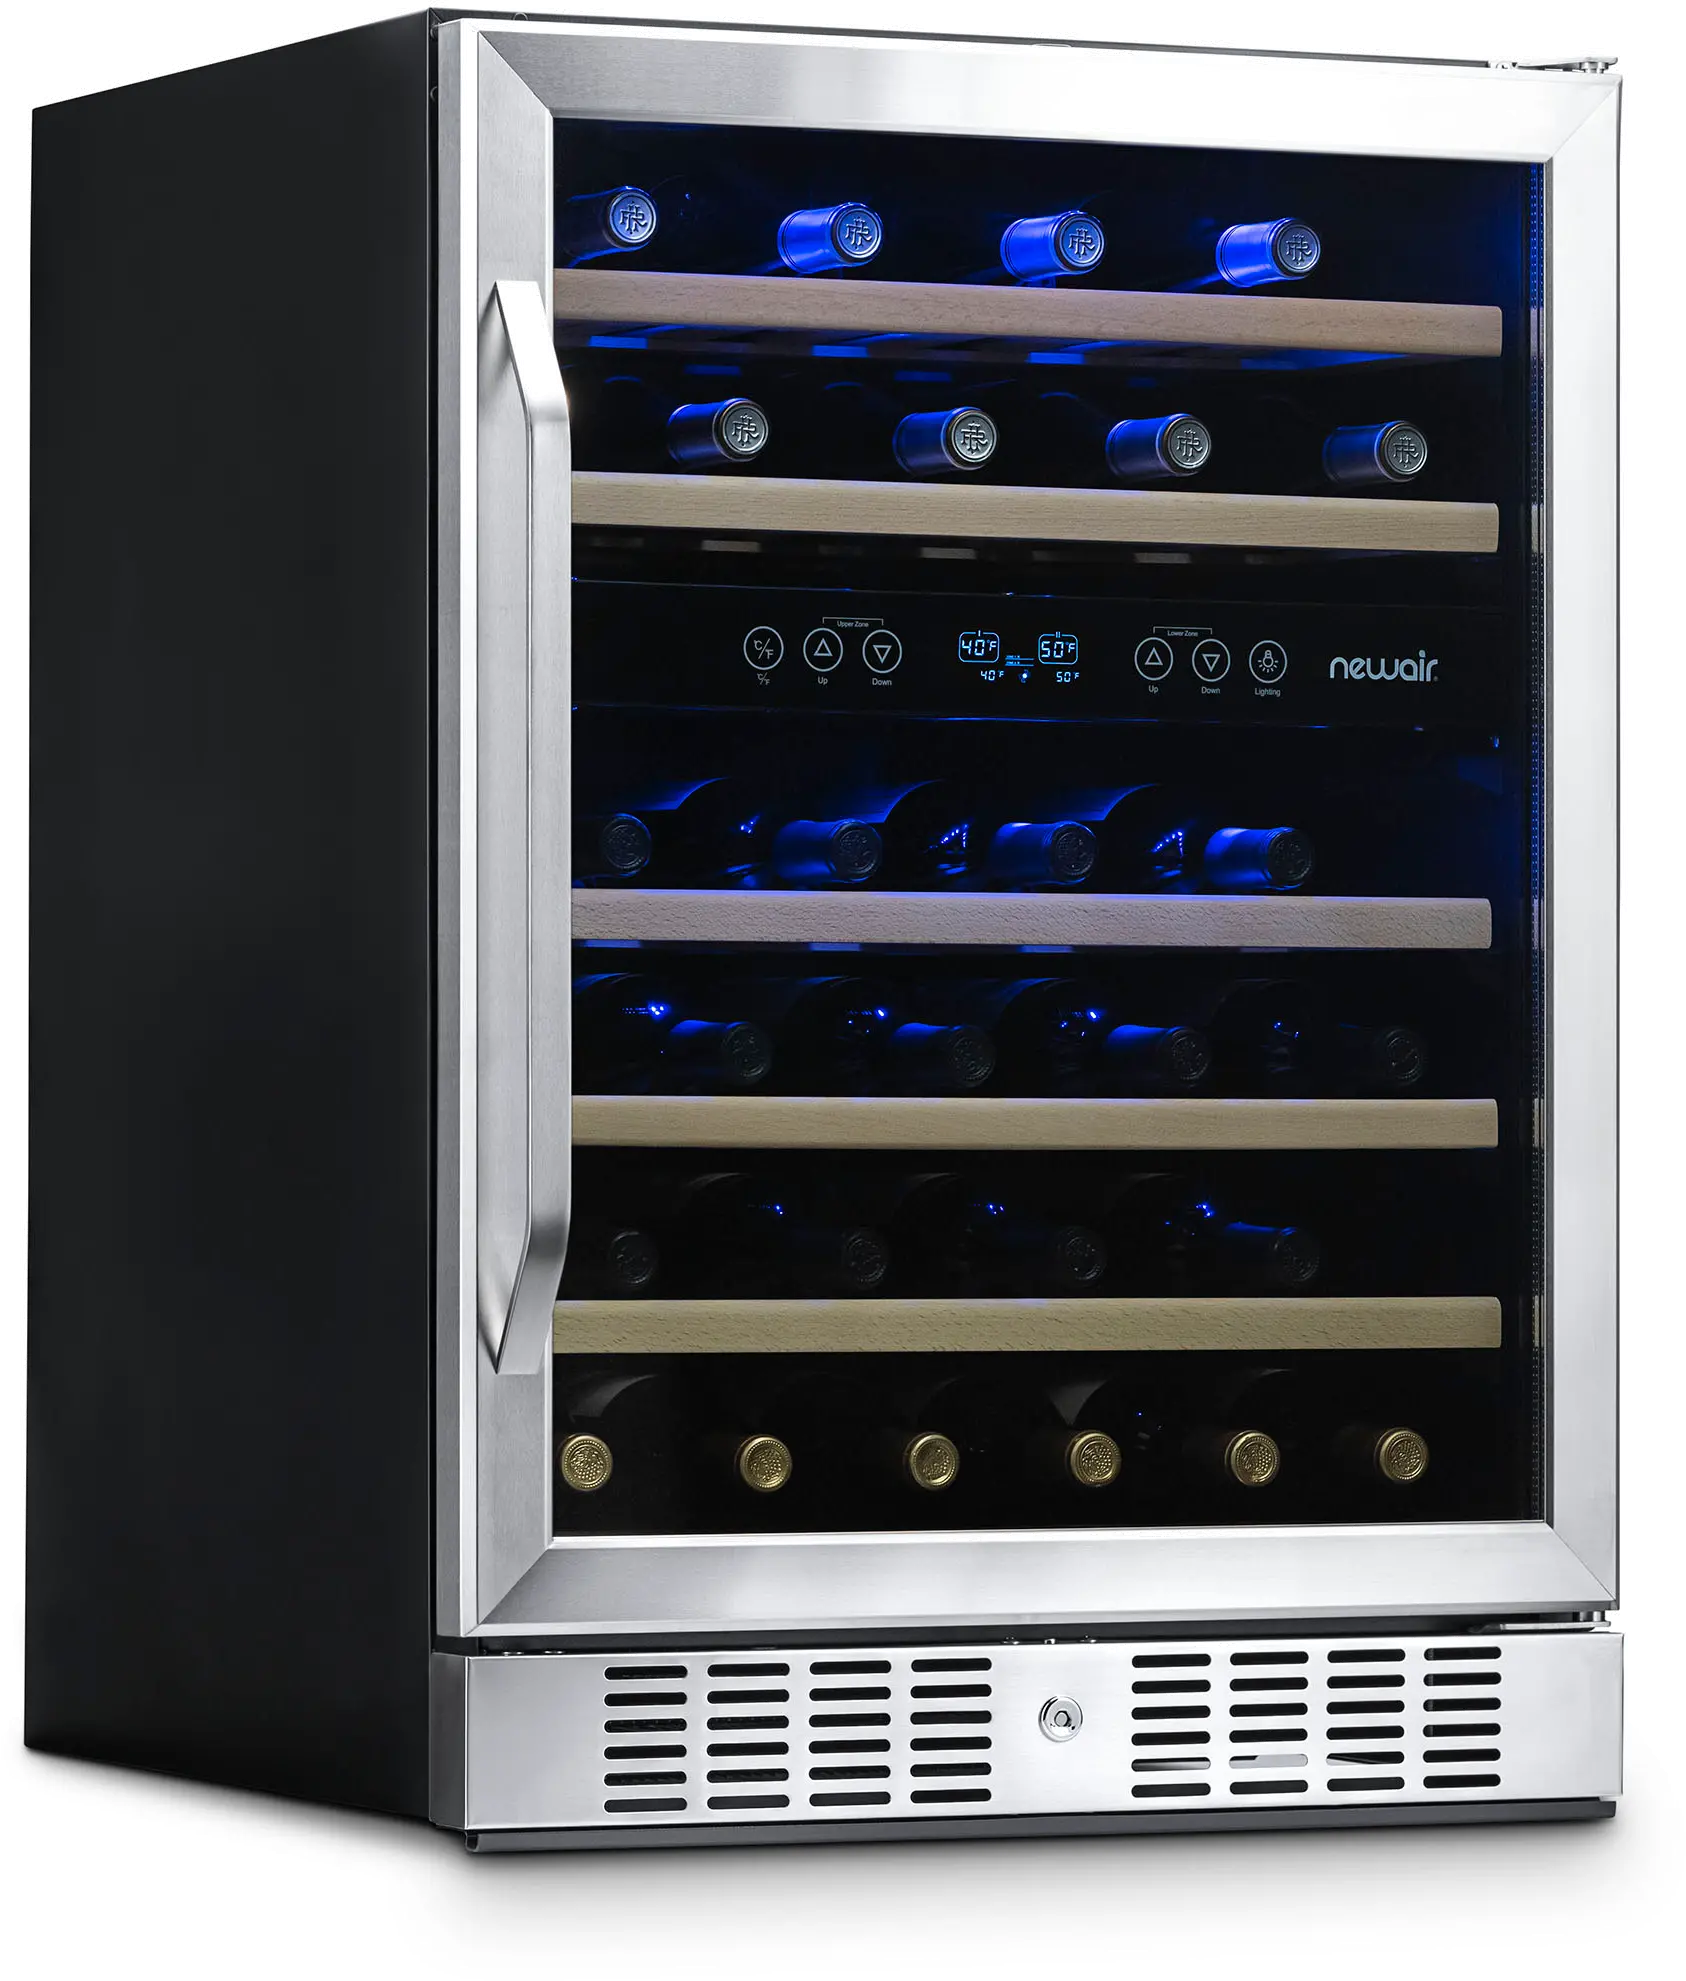 NWC046SS01 New Air 24 Inch 46 Bottle Dual Zone Wine Refrigera sku NWC046SS01